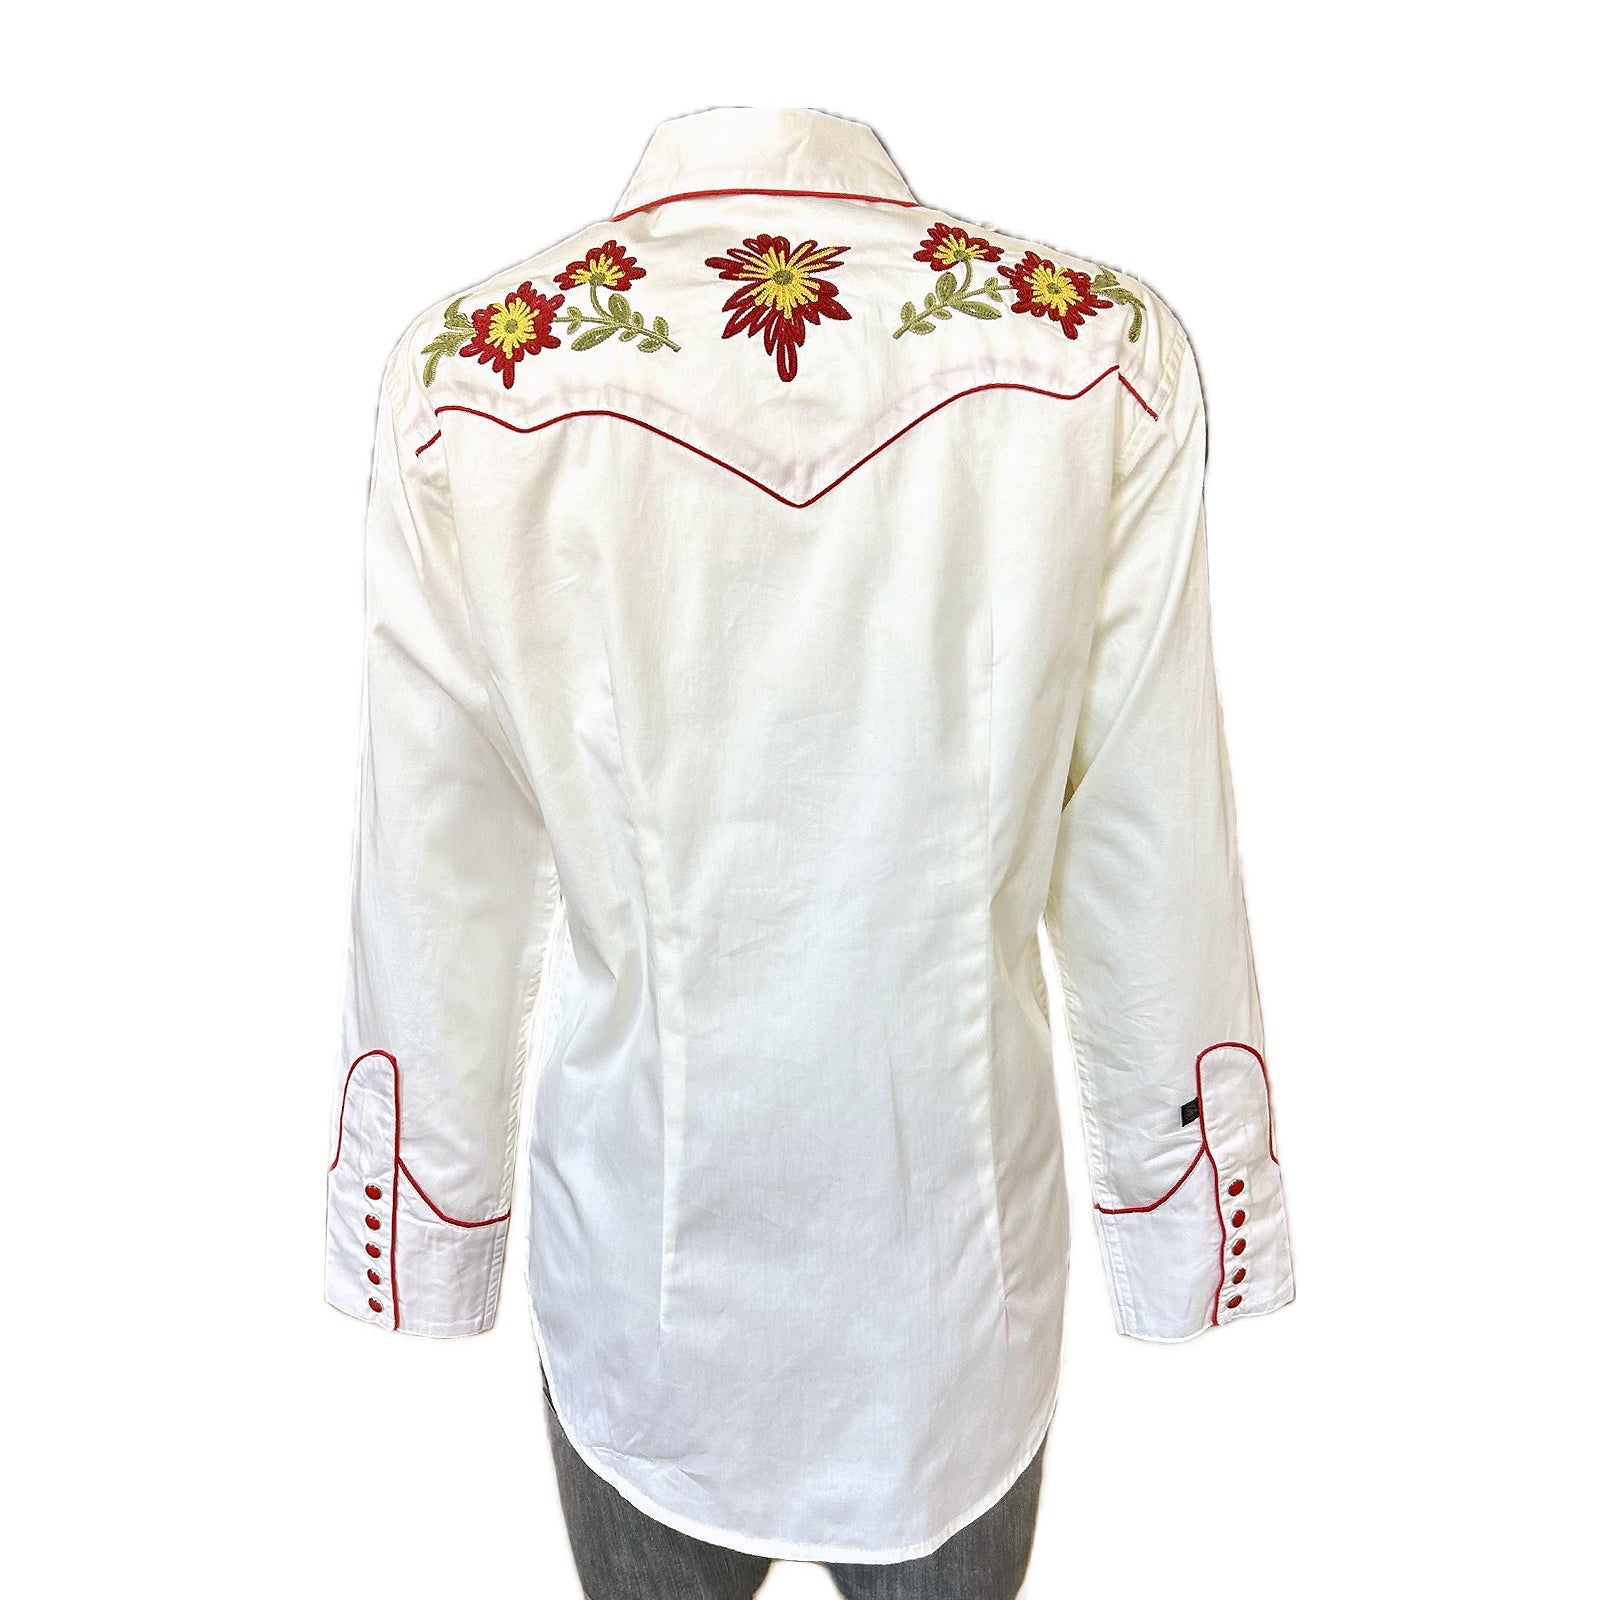 Rockmount Clothing Women's Ivory Vintage Floral Embroidered Western Shirt